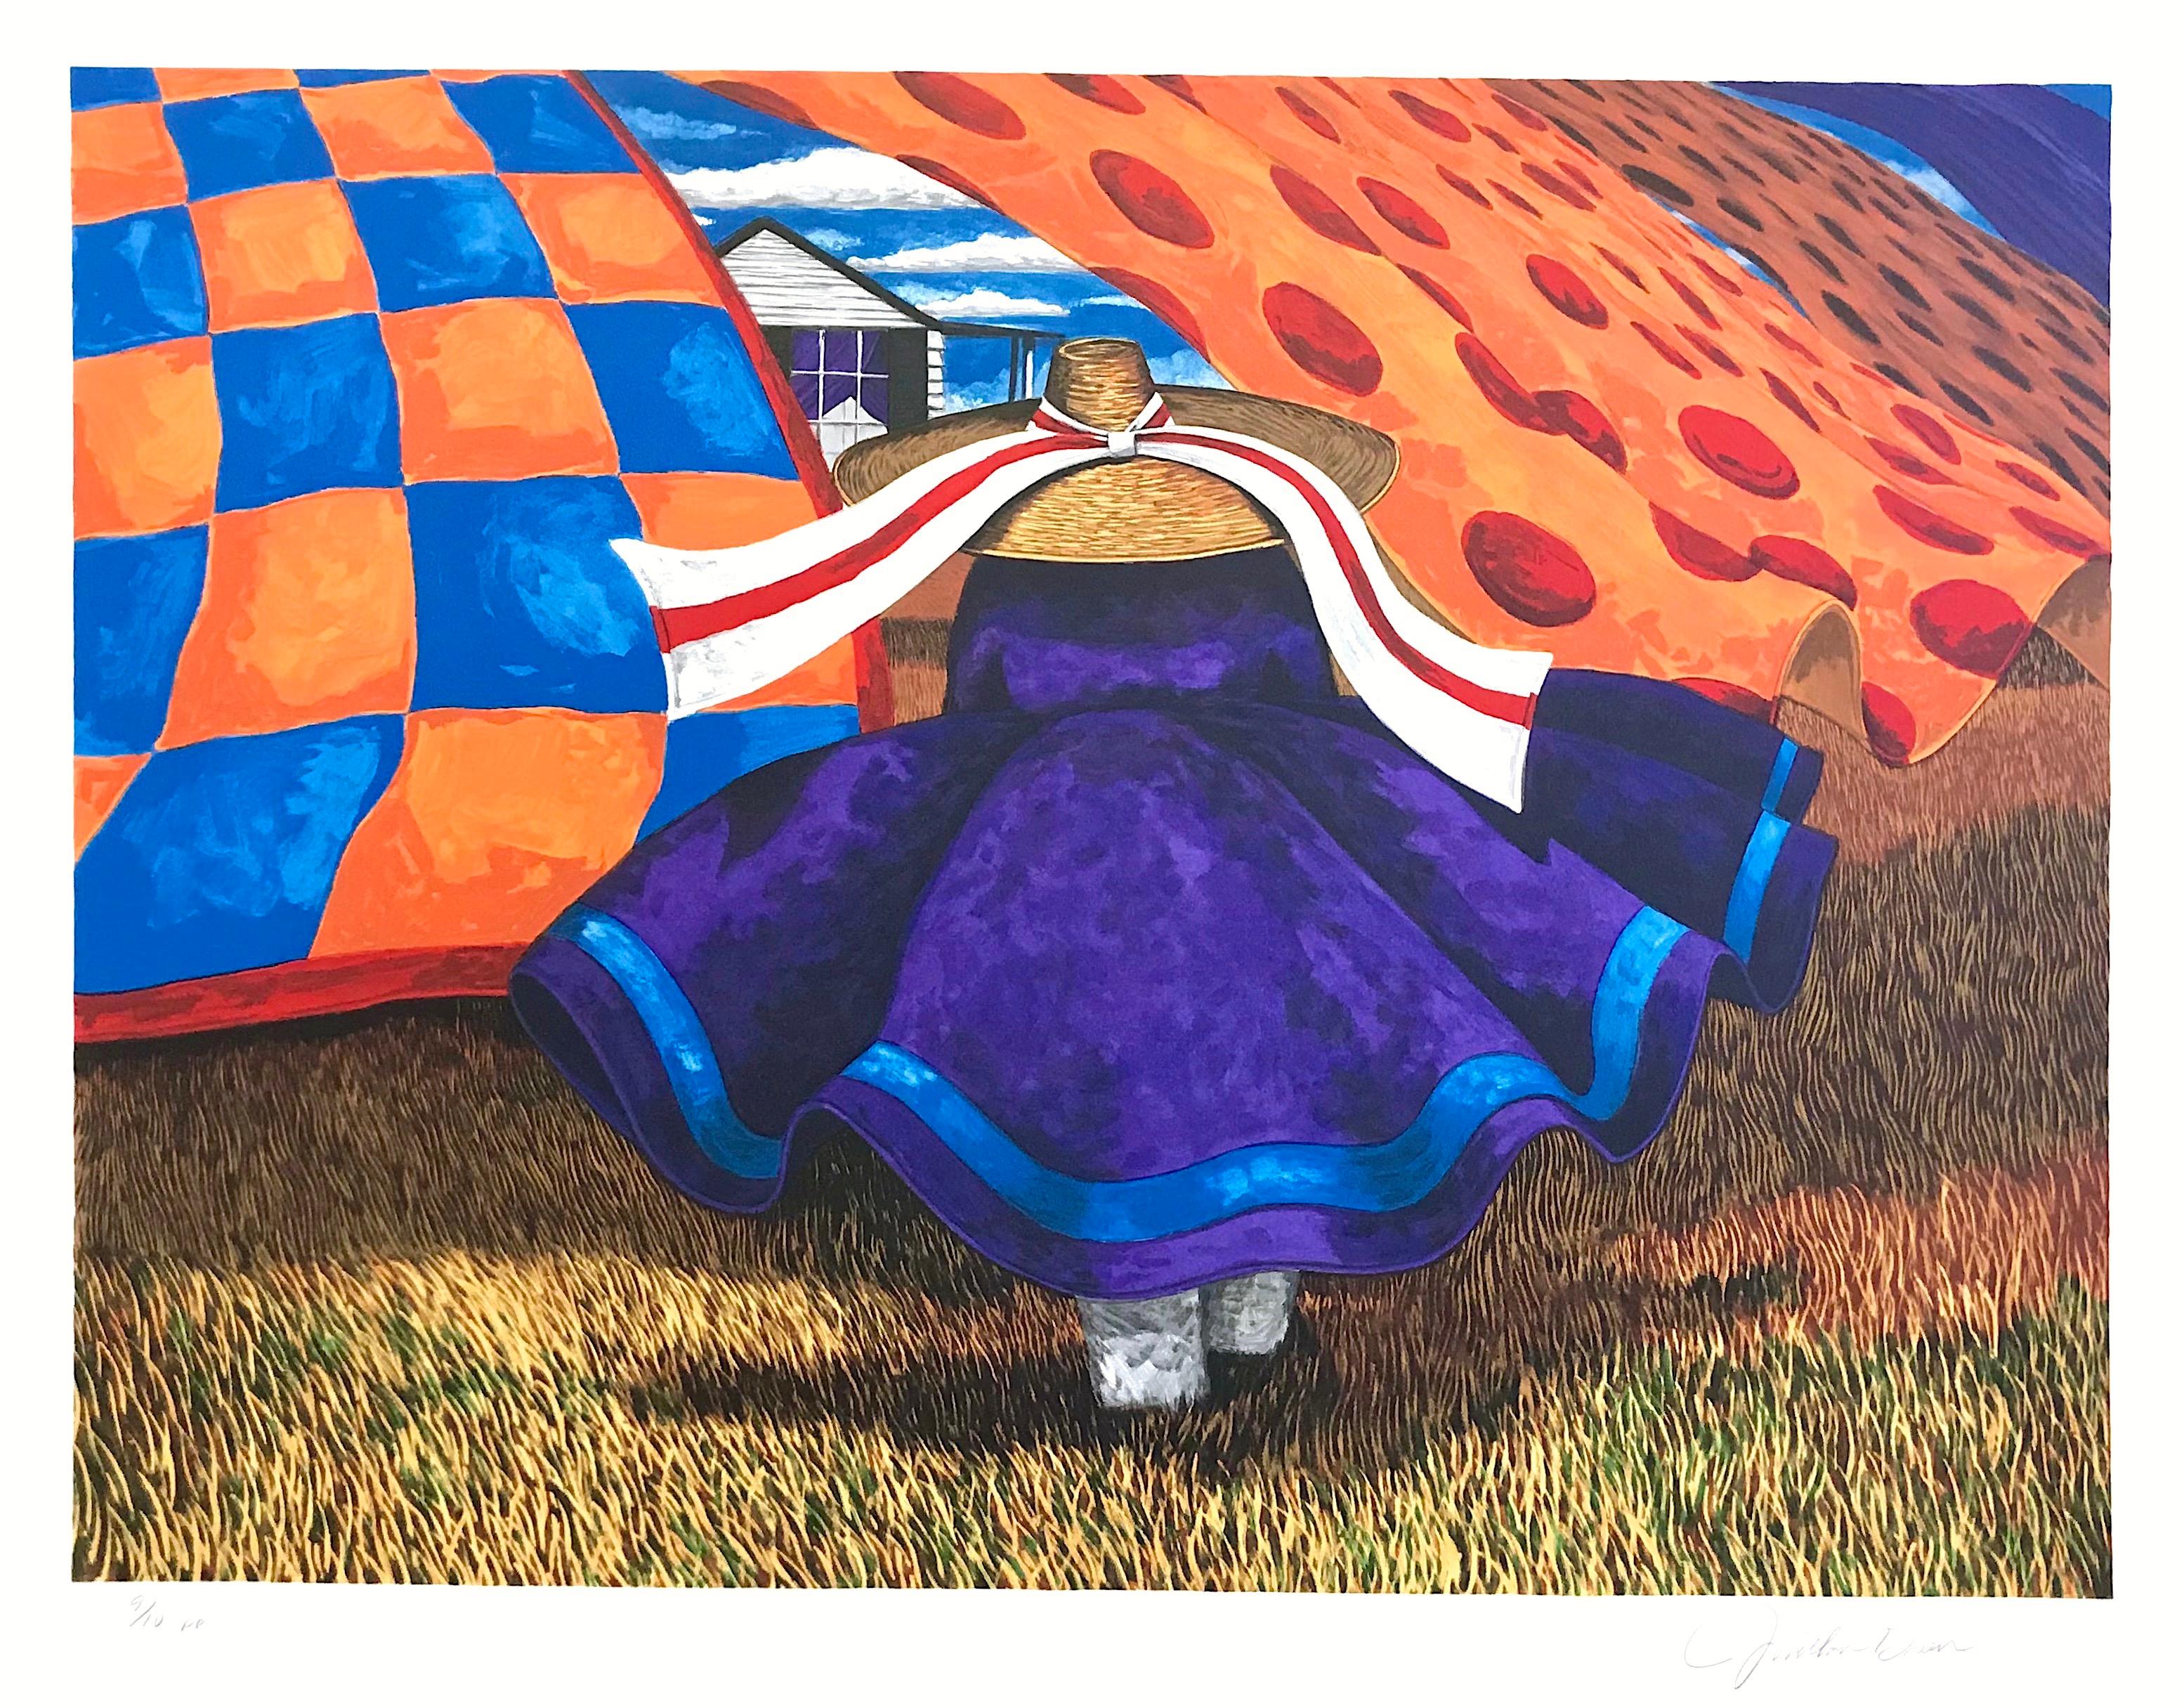 FARM WOMAN Signed Lithograph, Gullah Woman, Quilts, African American Culture - Print by Jonathan Green